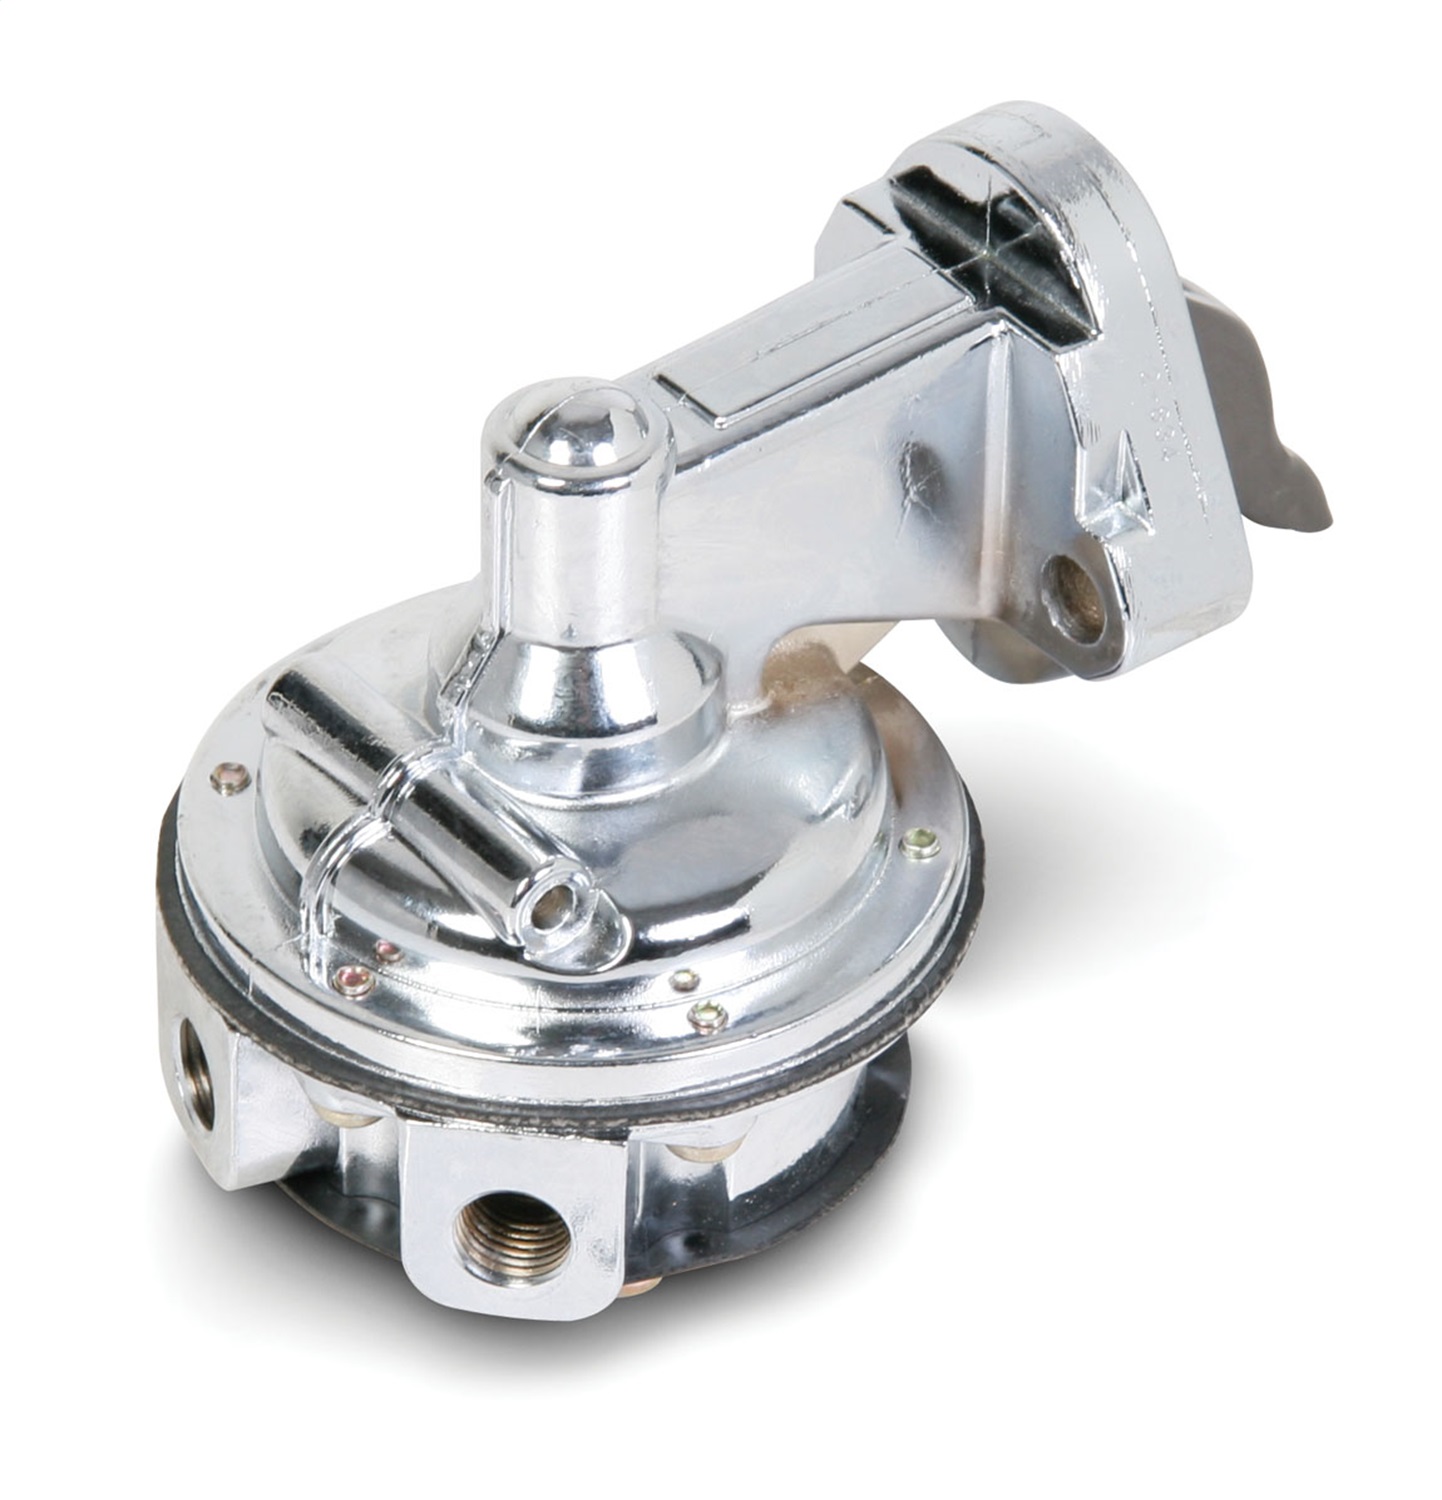 Holley Performance Holley Performance 12-834 Mechanical Fuel Pump